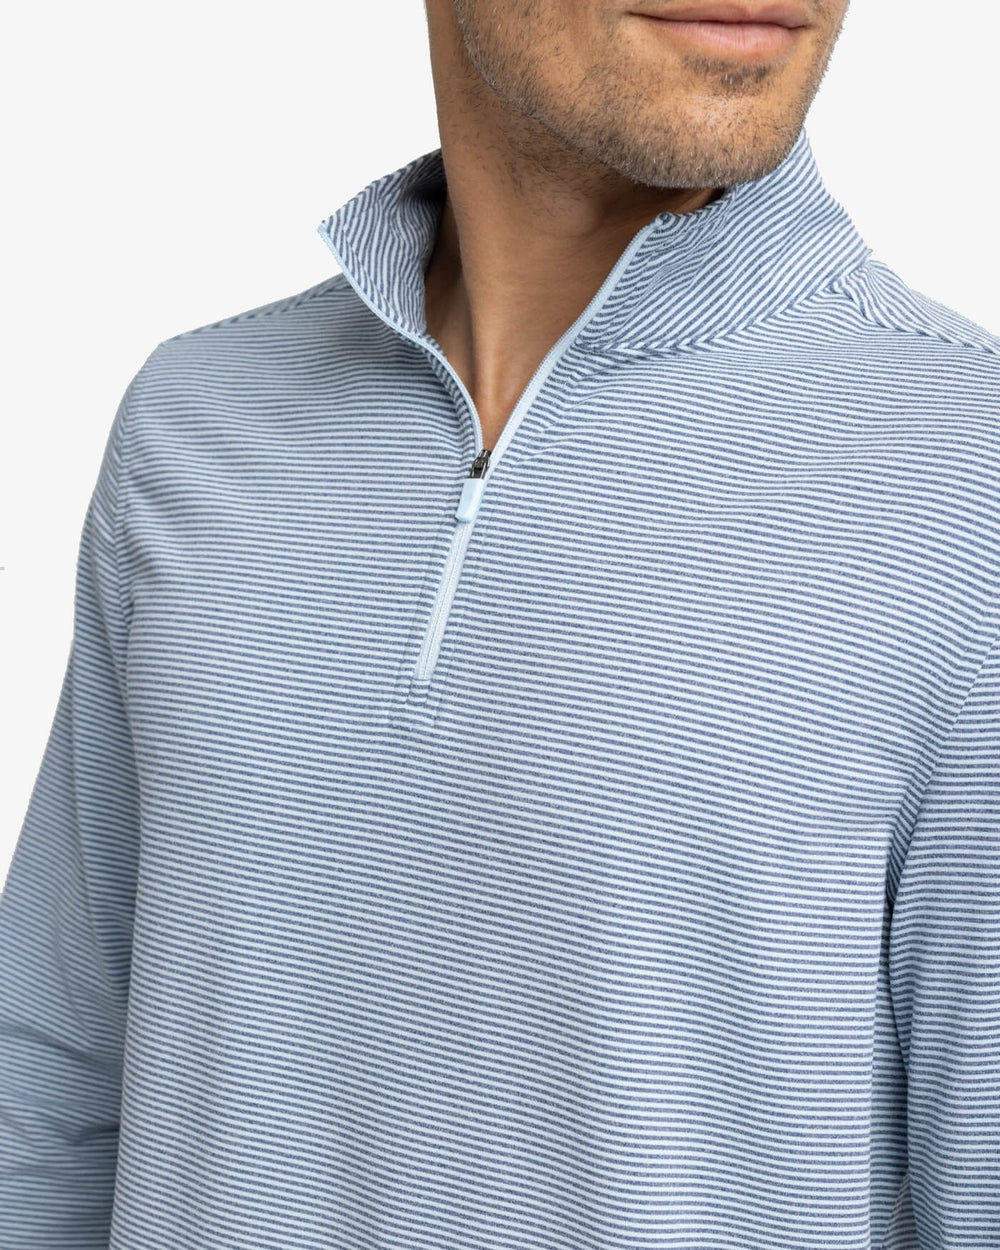 The detail view of the Southern Tide Cruiser Heather Micro-Stripe Performance Quarter Zip Pullover by Southern Tide - Heather Dream Blue